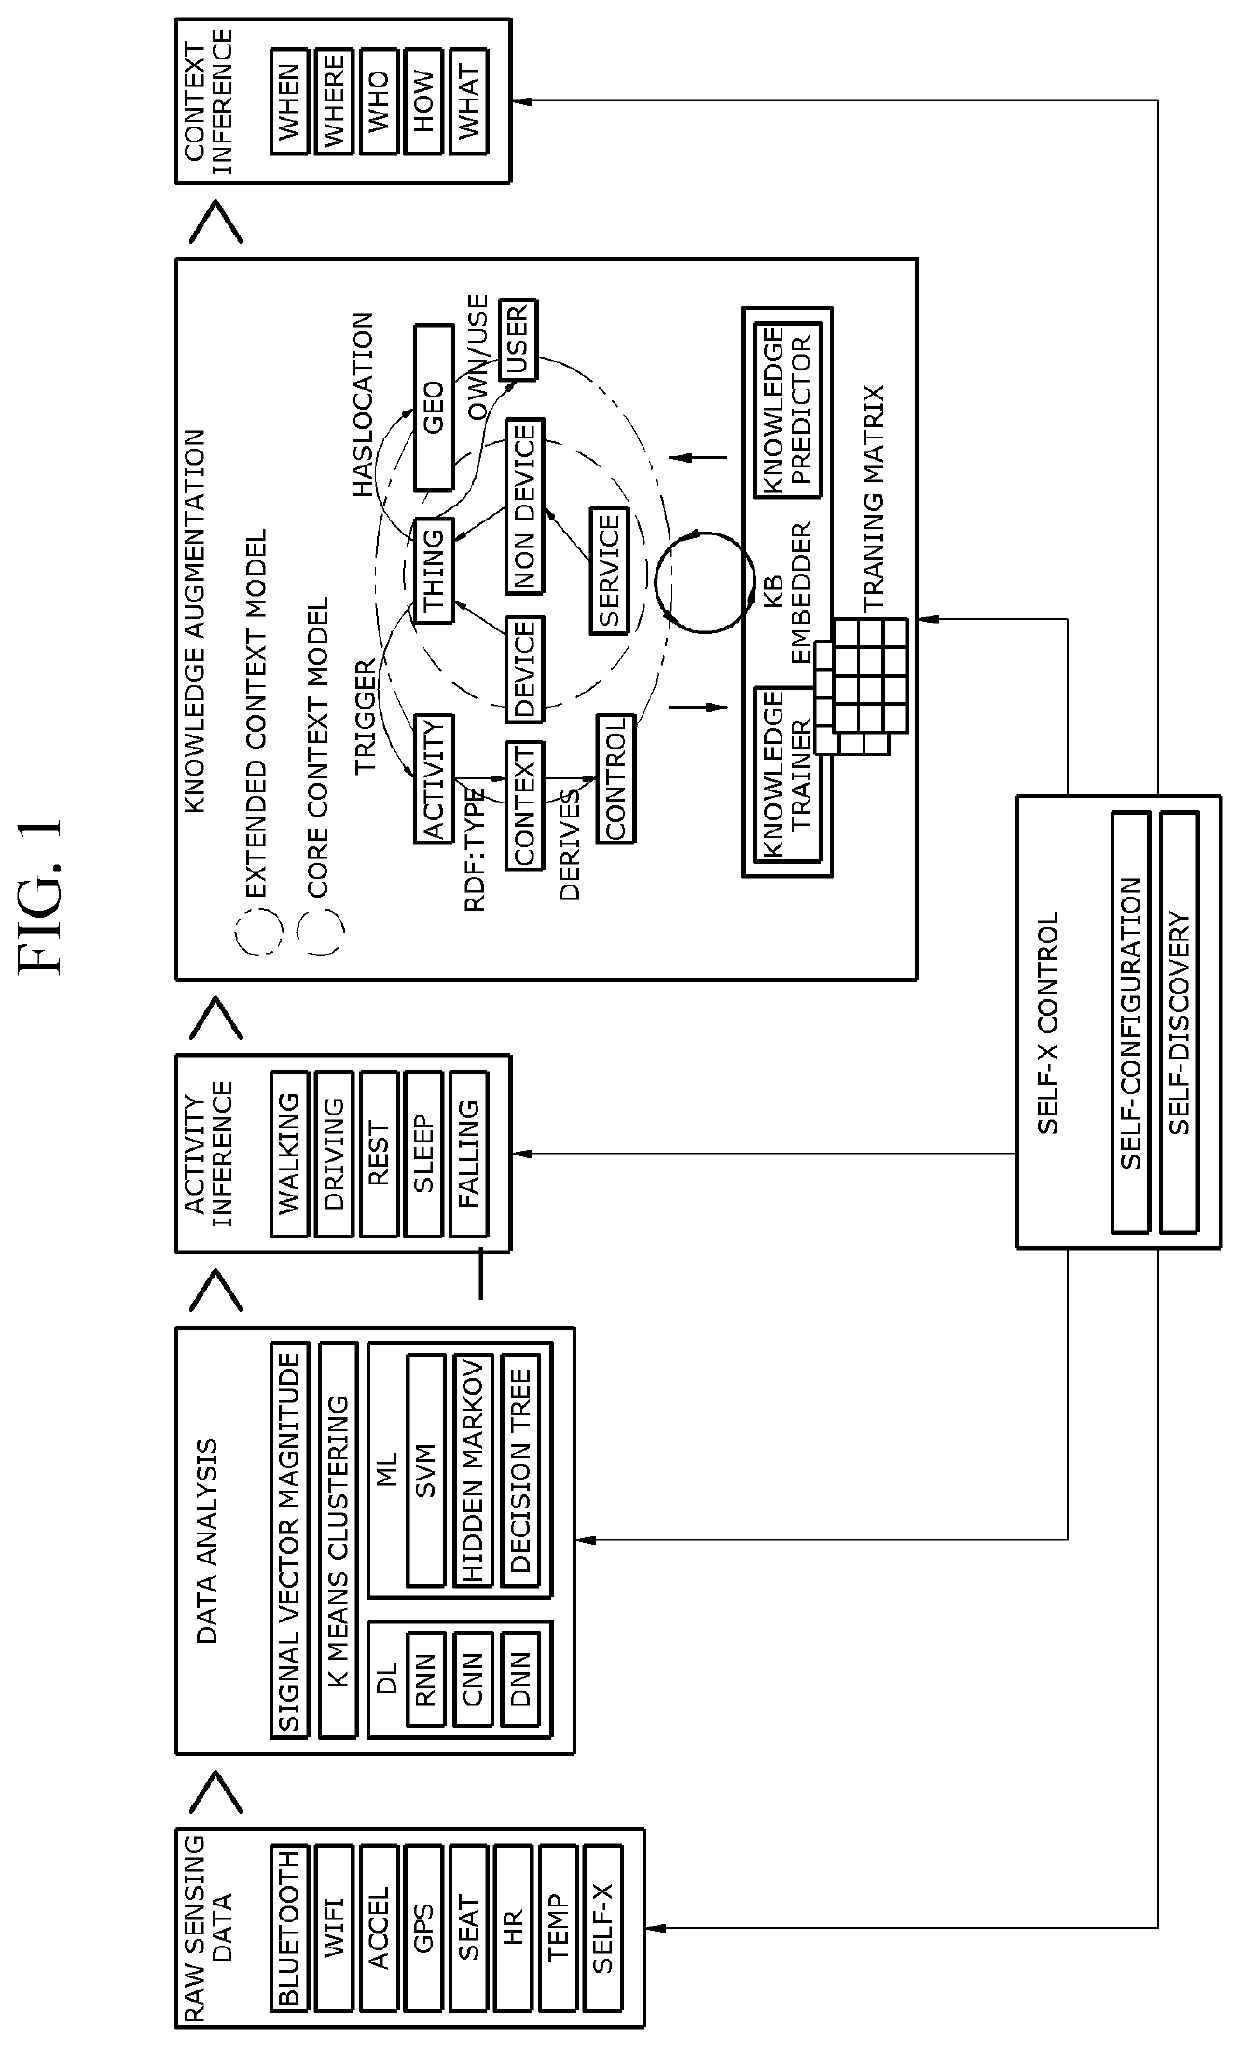 Apparatus and method for hierarchical context awareness and device autonomous configuration by real-time user behavior analysis